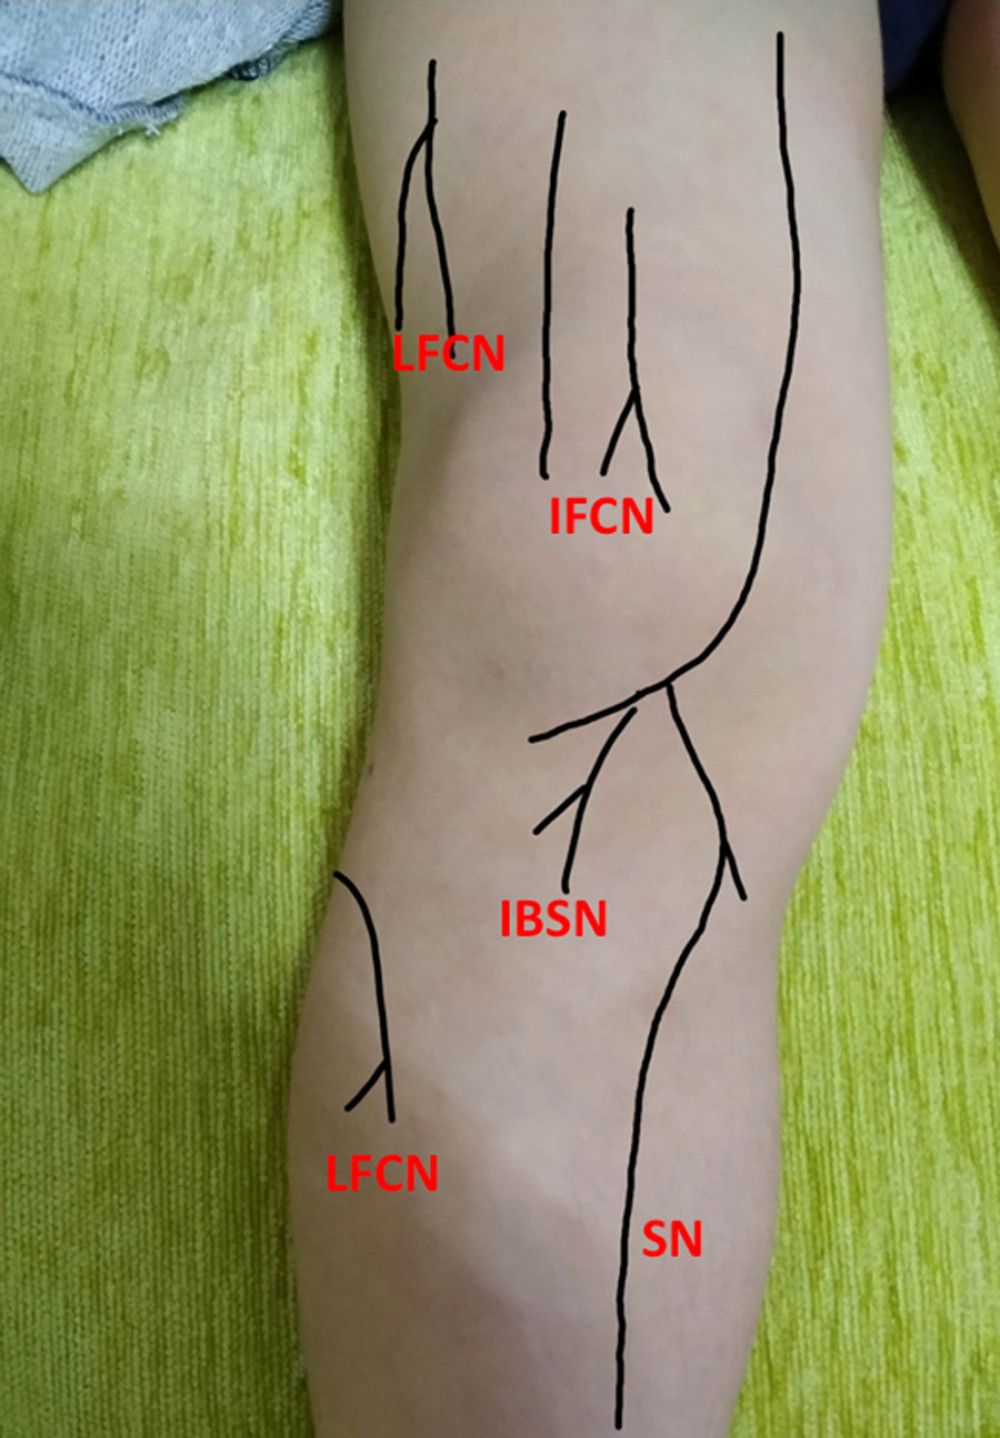 Tender chronic constrictive injury (CCI) points. LFCN – lateral femoral cutaneous nerve; IFCN – intermediate femoral cutaneous nerve; IBSN – infrapatellar branch of saphenous nerve; SN – saphenous nerve.